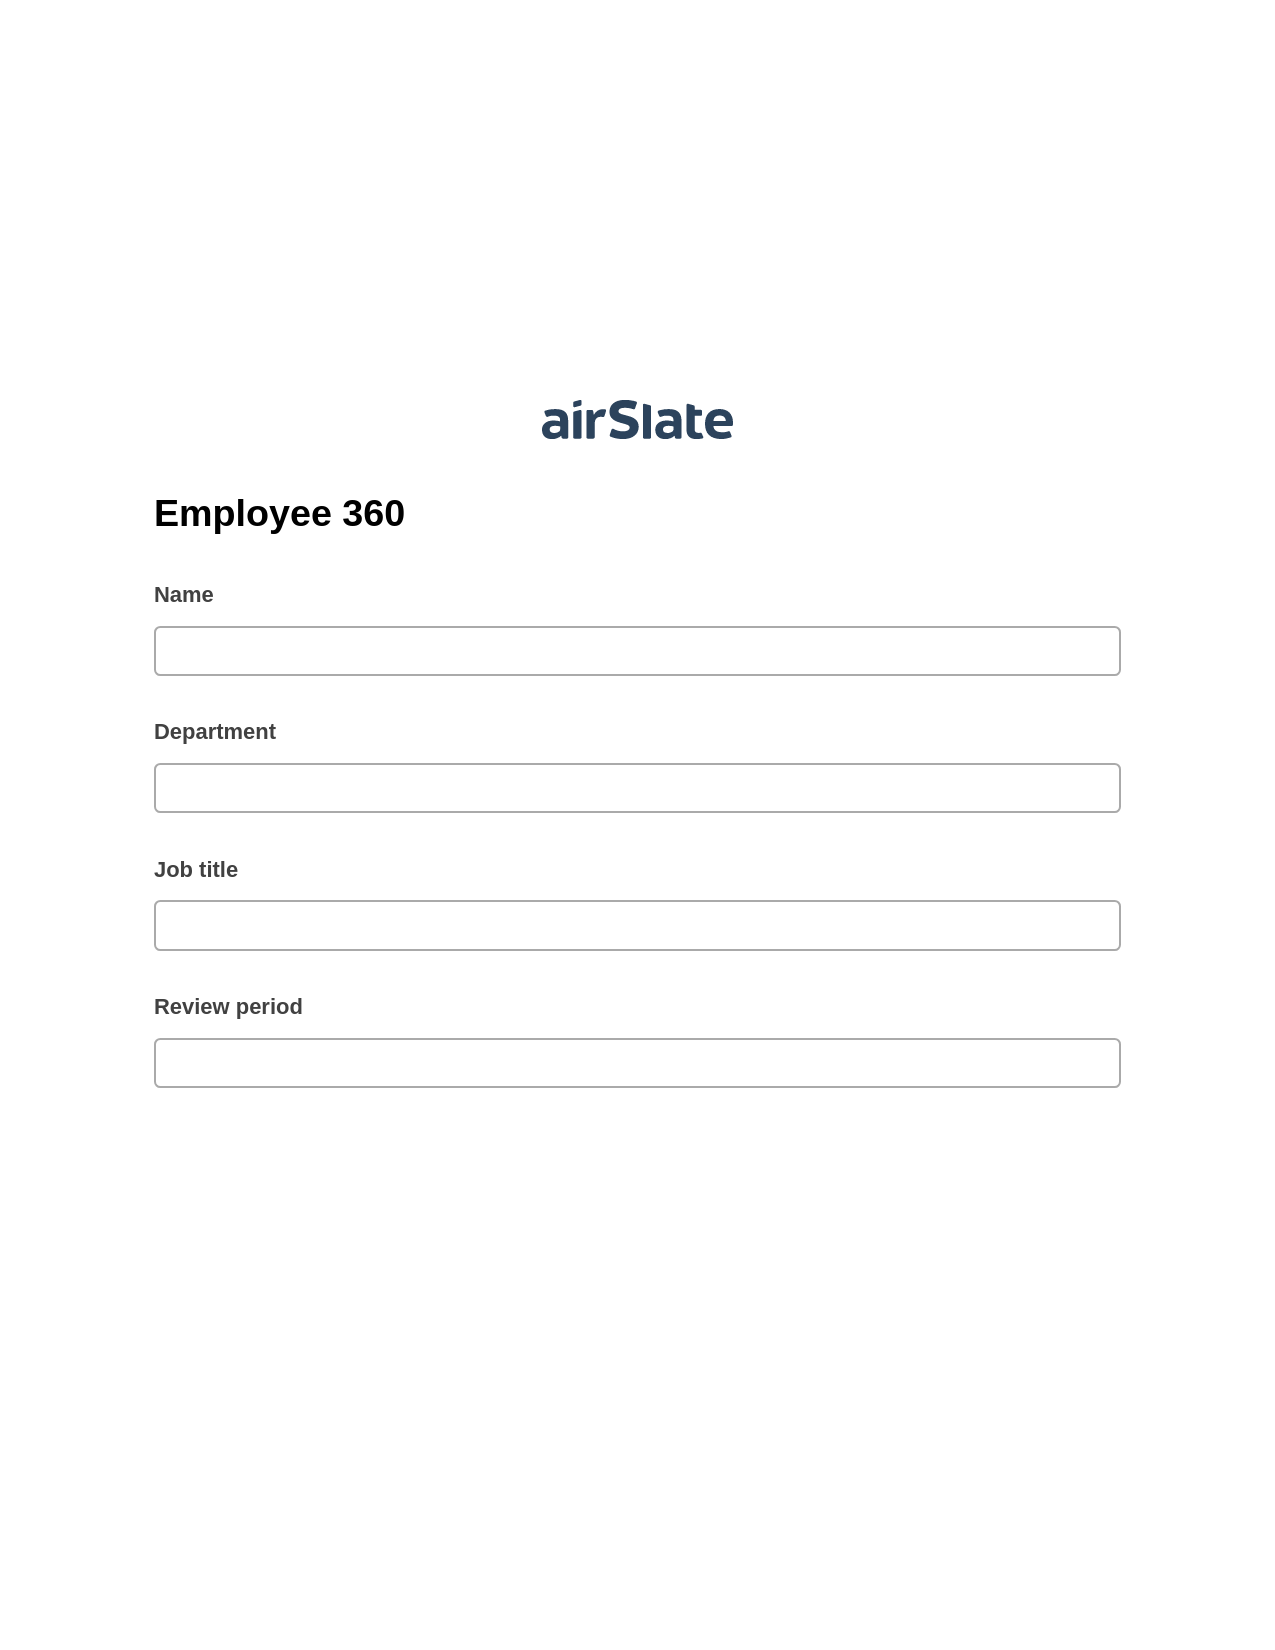 Employee 360 Prefill from NetSuite records, Google Calendar Bot, Export to Excel 365 Bot